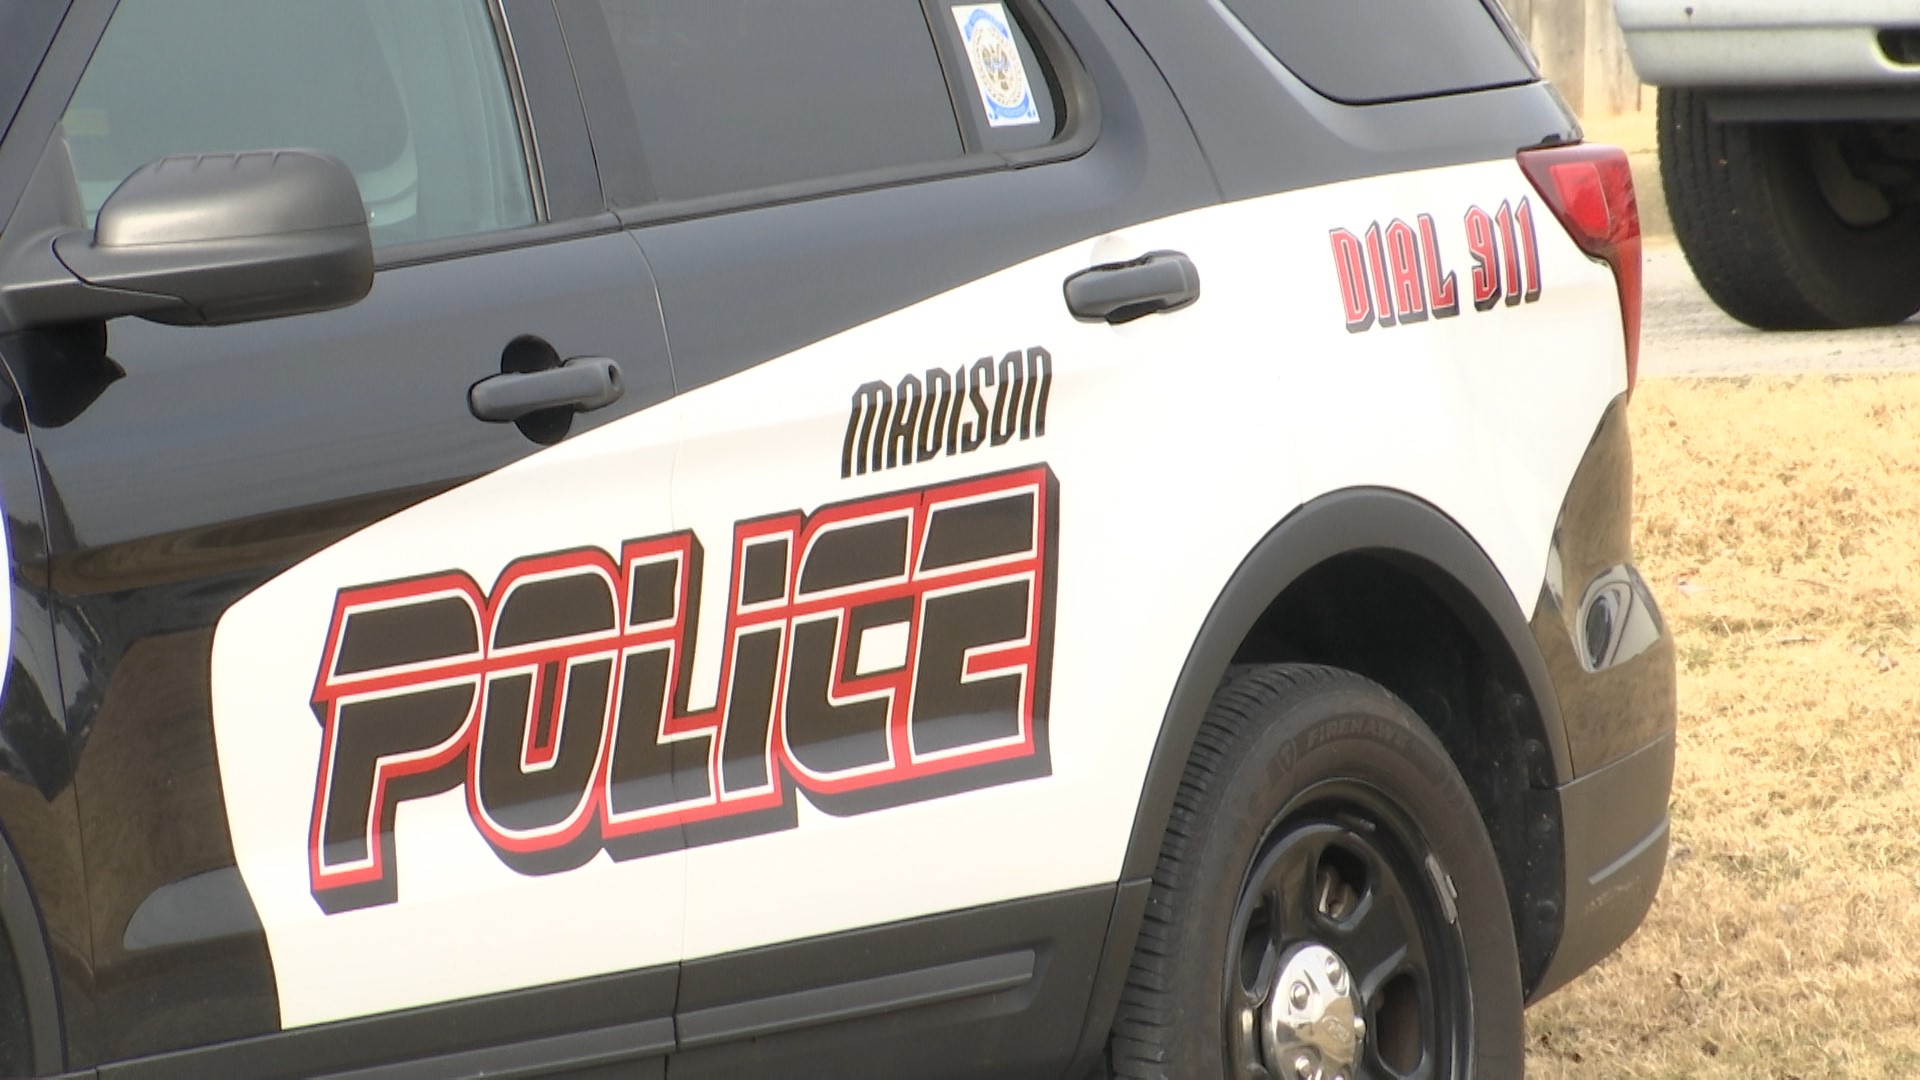 The Madison Police Citizen Advisory Committee hopes to bridge the gap and improve the relationship between diverse residents and their police.